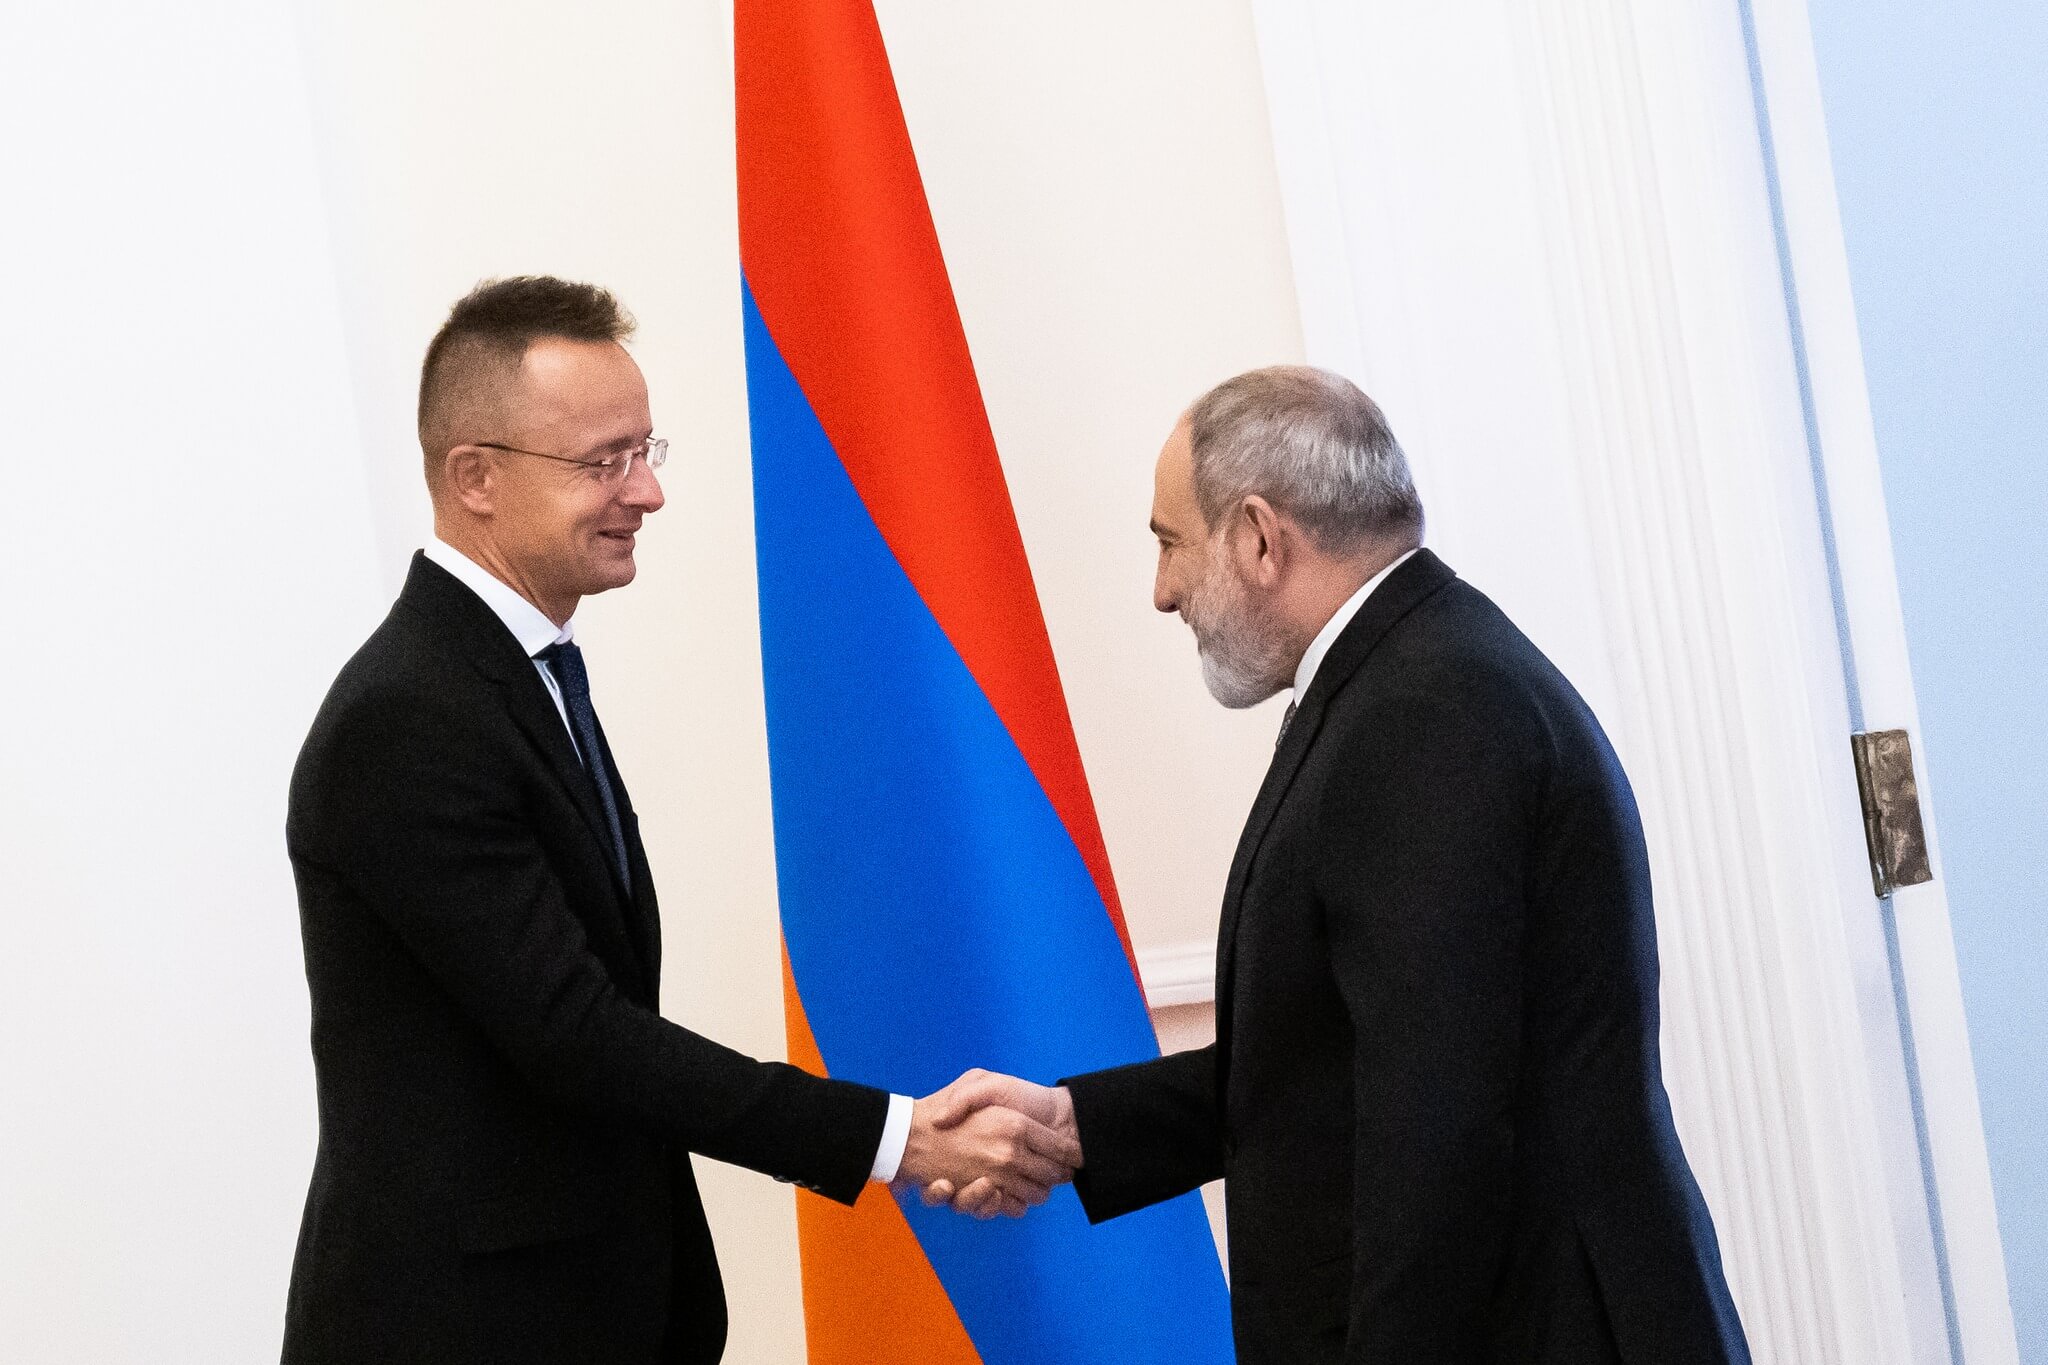 After Ten-Year Hiatus Cooperation Between Hungary & Armenia Relaunched - New Flight Between Budapest - Yerevan Coming?